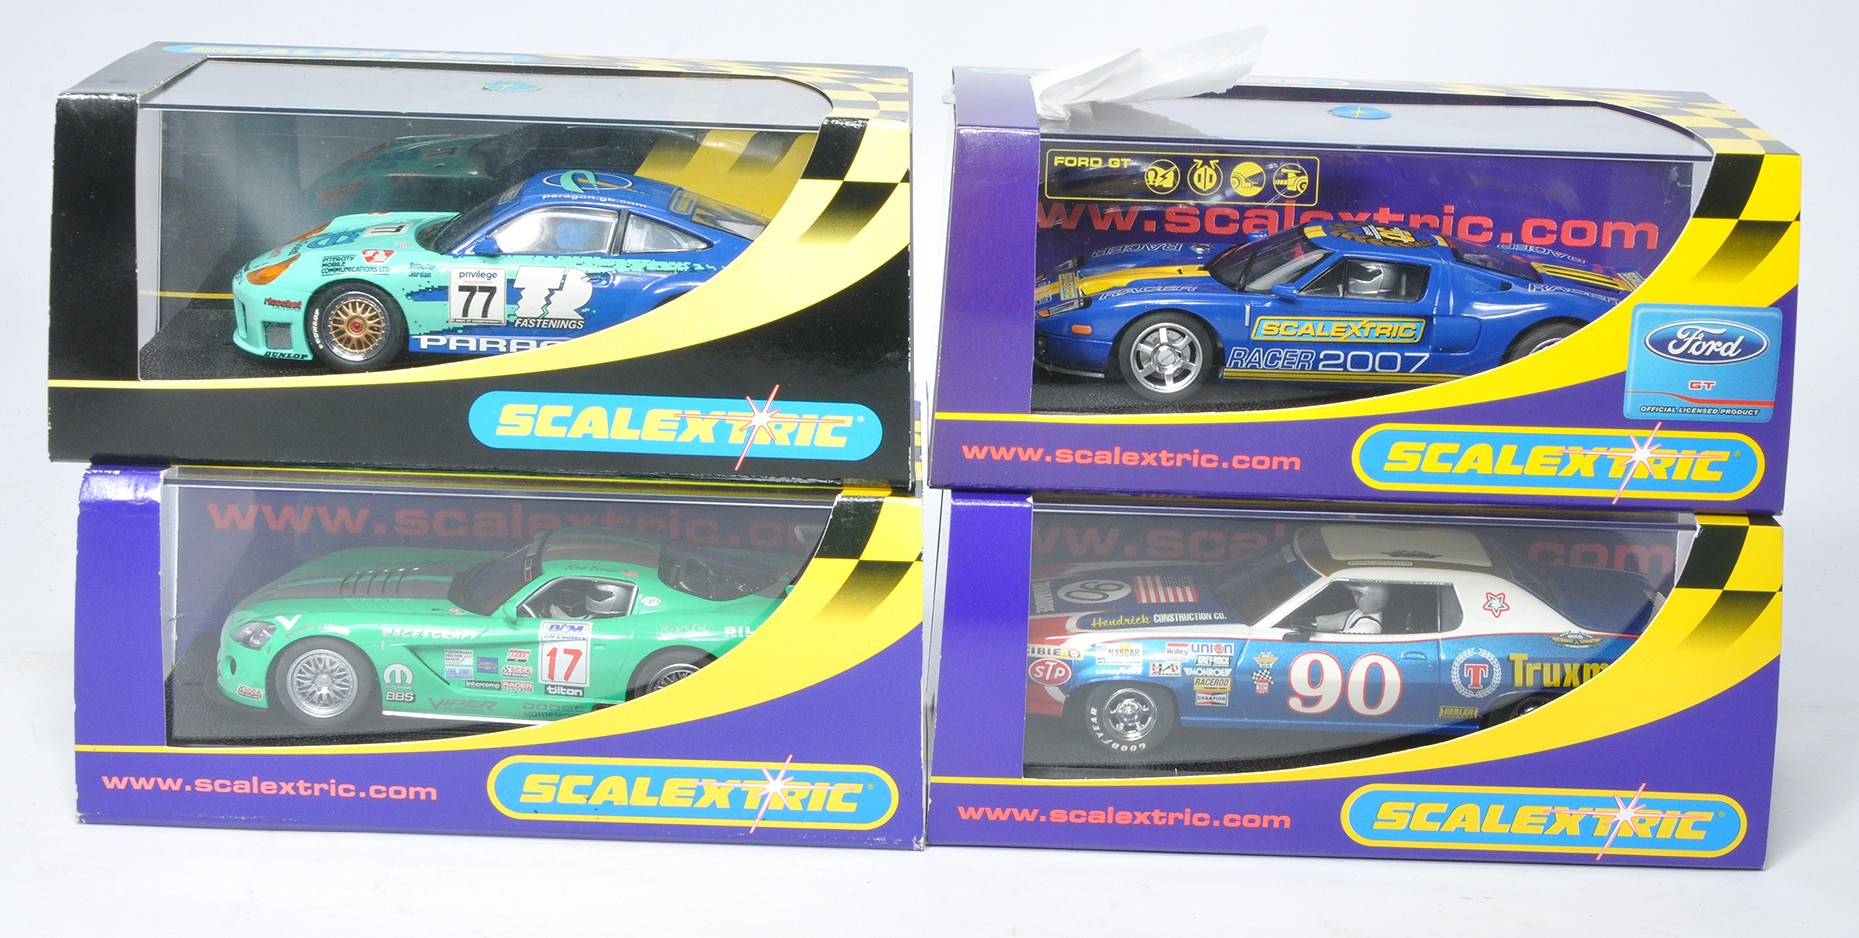 Scalextric slot car issues comprising Ford GT Scalextric Club 2007, Porsche 911 GT3R, Ford Gran